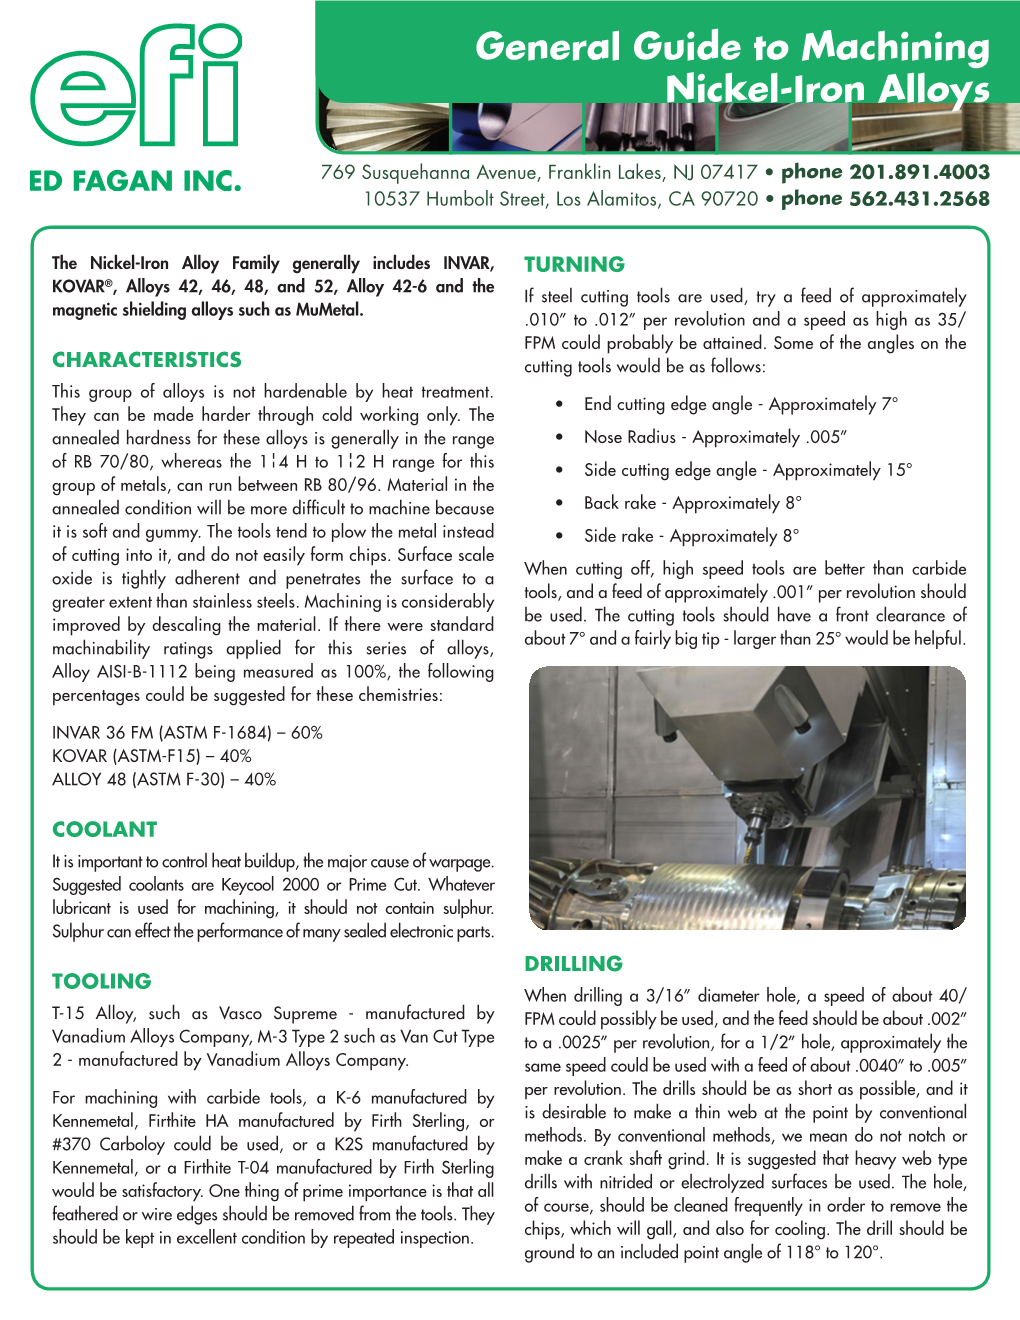 General Guide to Machining Nickel-Iron Alloys from Ed Fagan Inc